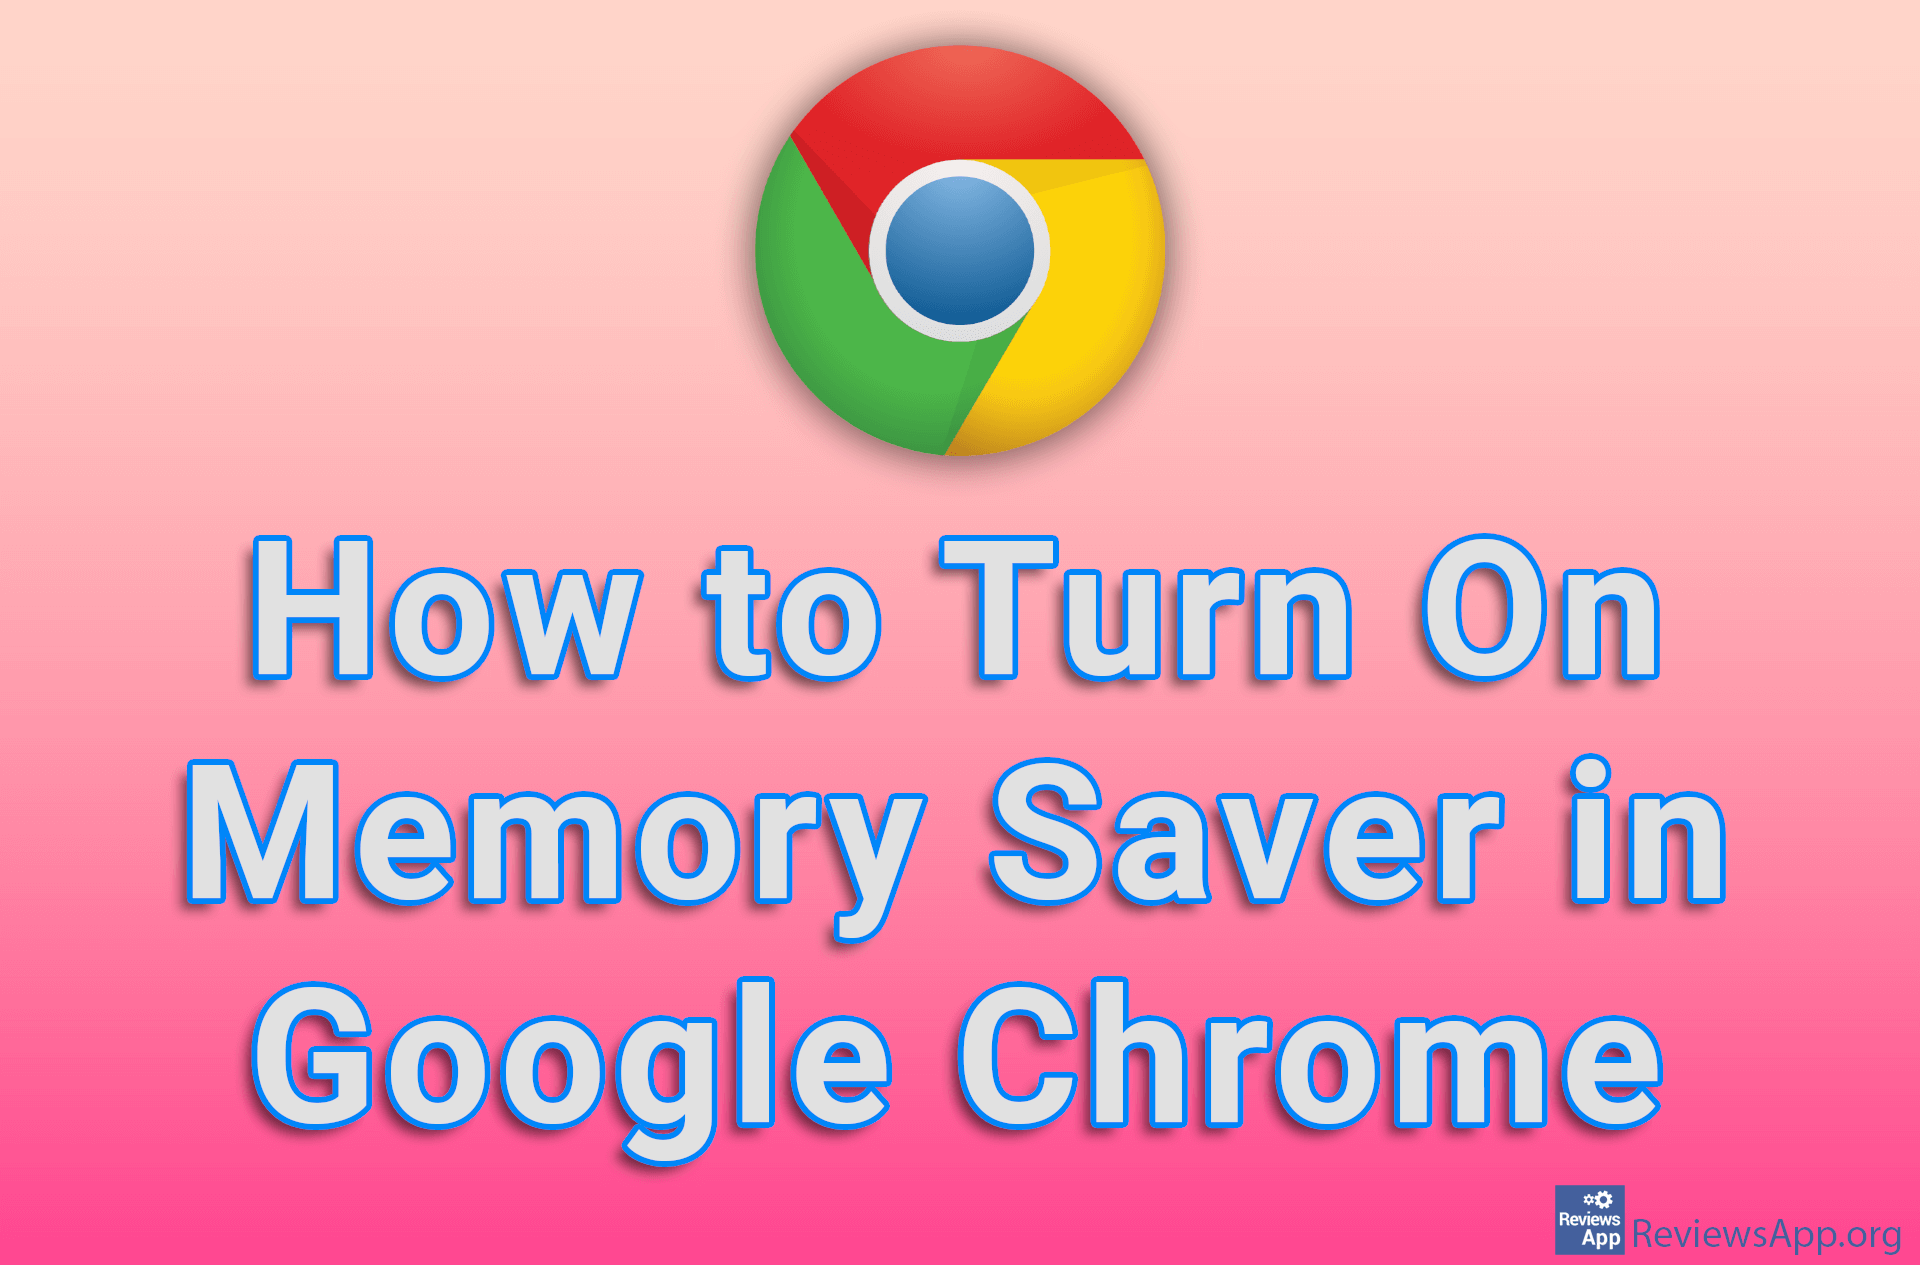 How to Turn On Memory Saver in Google Chrome